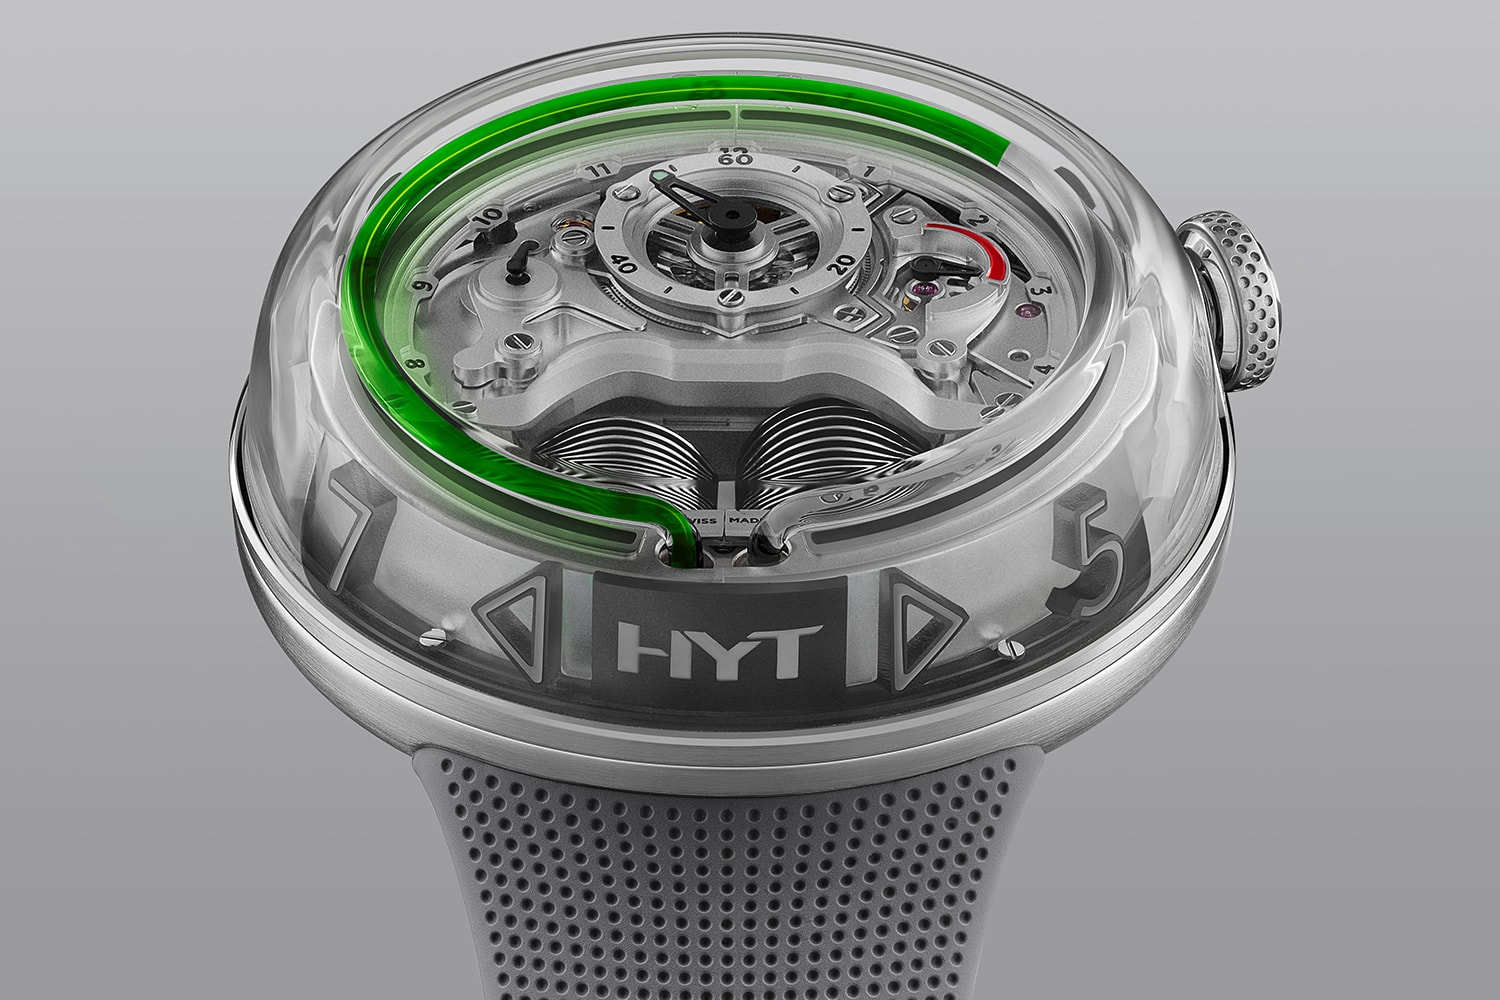 HYT Watches H5 Collection Info swiss watches Watches Eric Coudray 